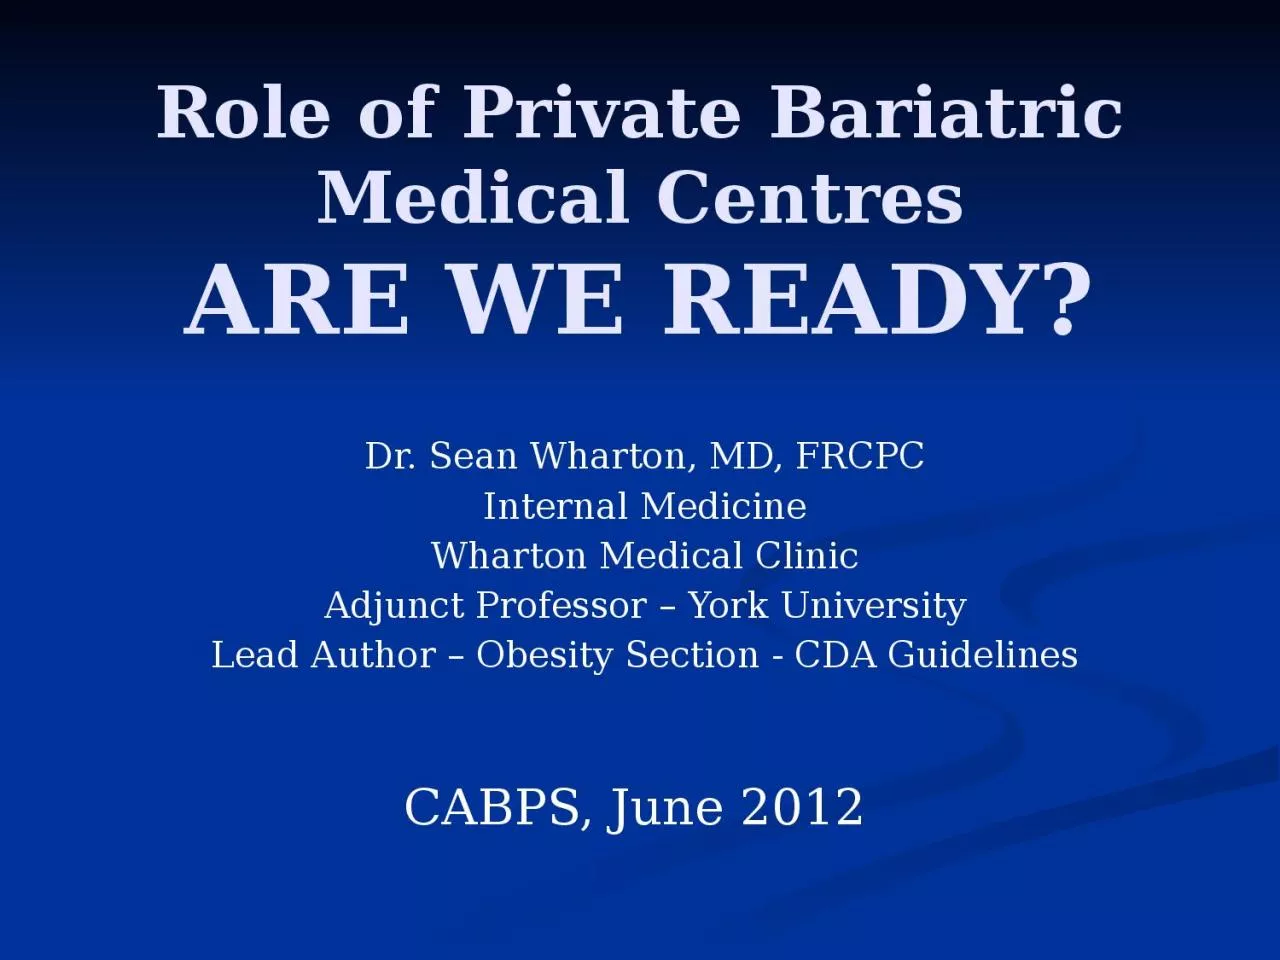 Role of Private Bariatric Medical